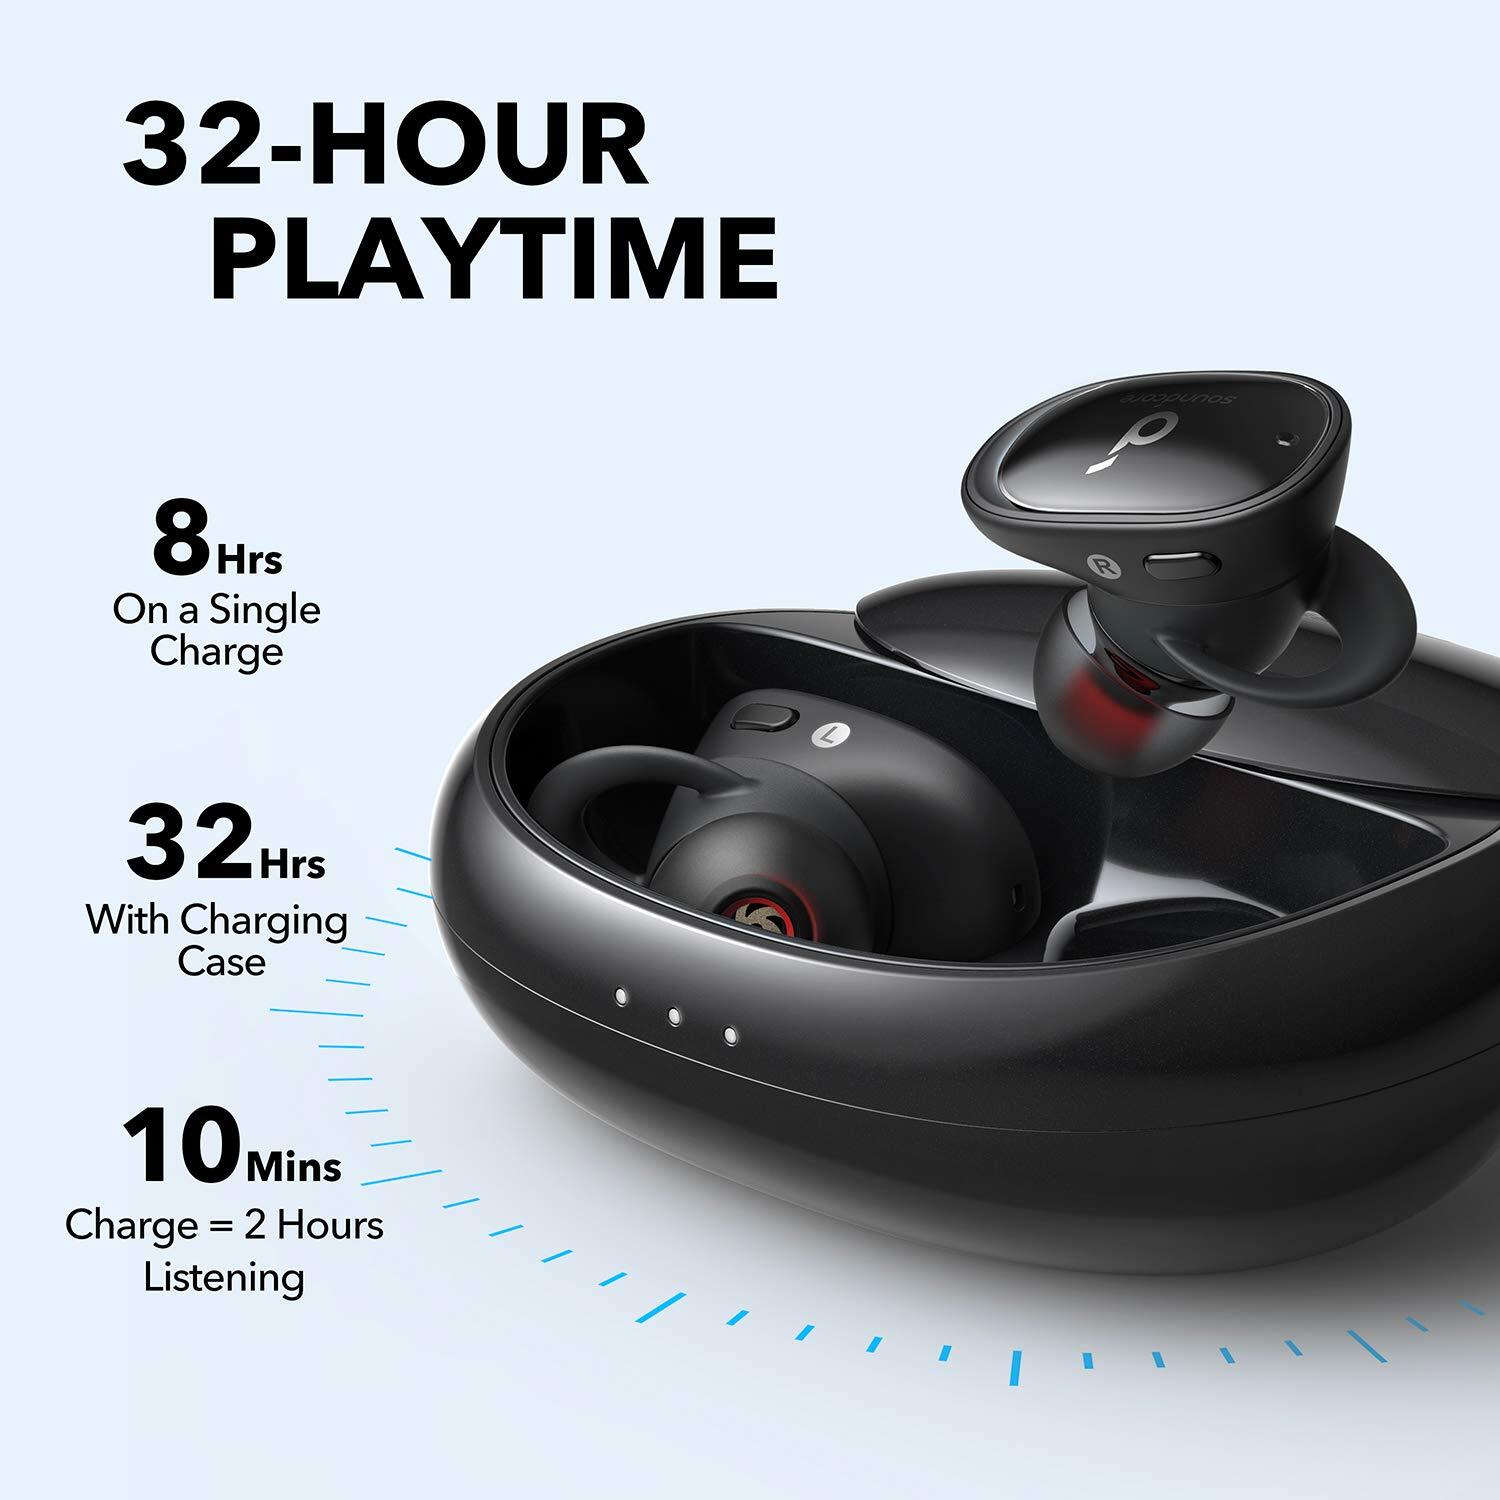 Soundcore Anker Liberty 2 Wireless Earbuds, 32H Playtime, Hear ID Personalized Sound, Bluetooth 5.0, 4 Mics with Uplink Noise Cancellation Headphones-M000000000463 www.mysocially.com